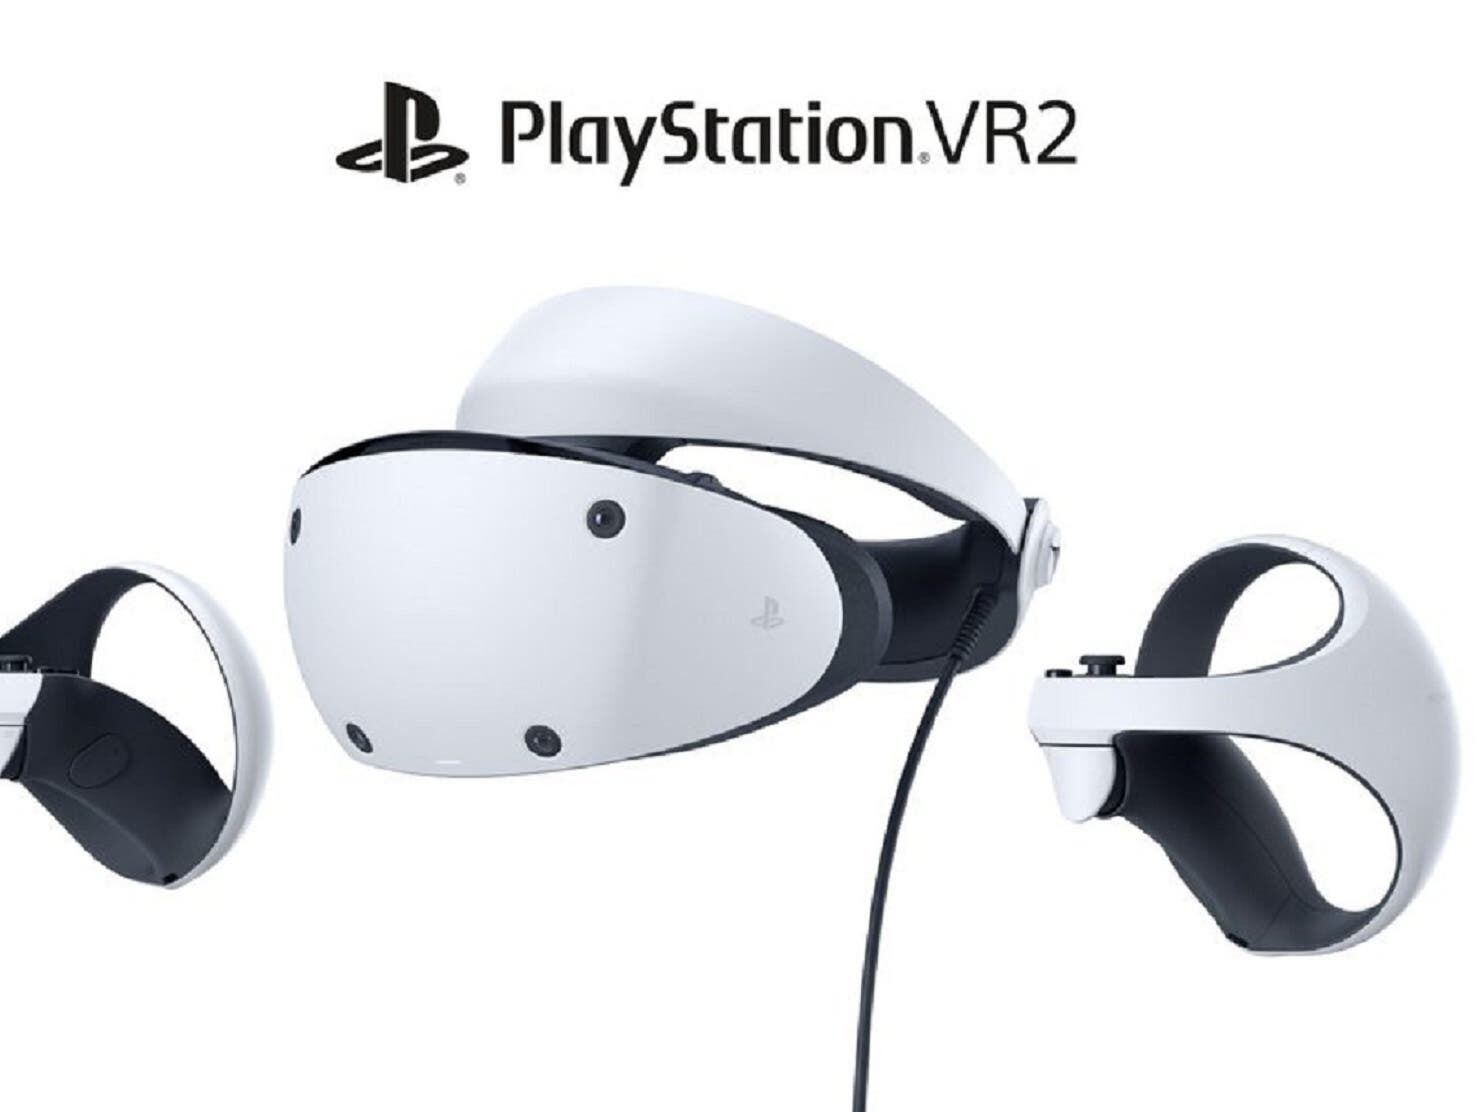 Sony offers first look at PlayStation VR2 headset